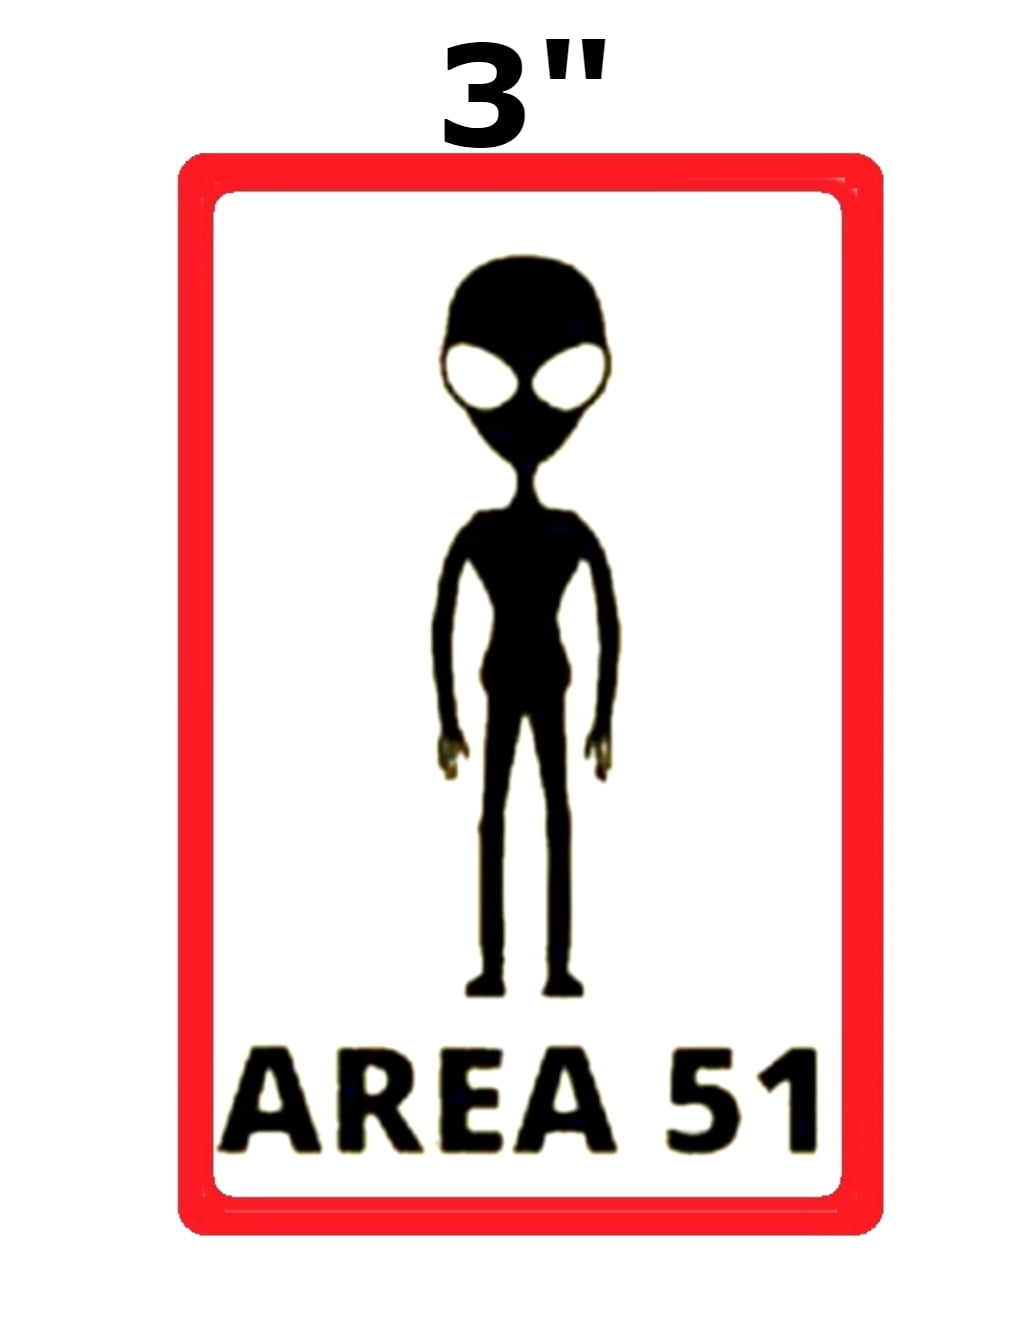 ALIEN WITH BOW STORM AREA 51 UFO ALIEN ROSWELL Decal Car STICKER  4.5 X 5.5